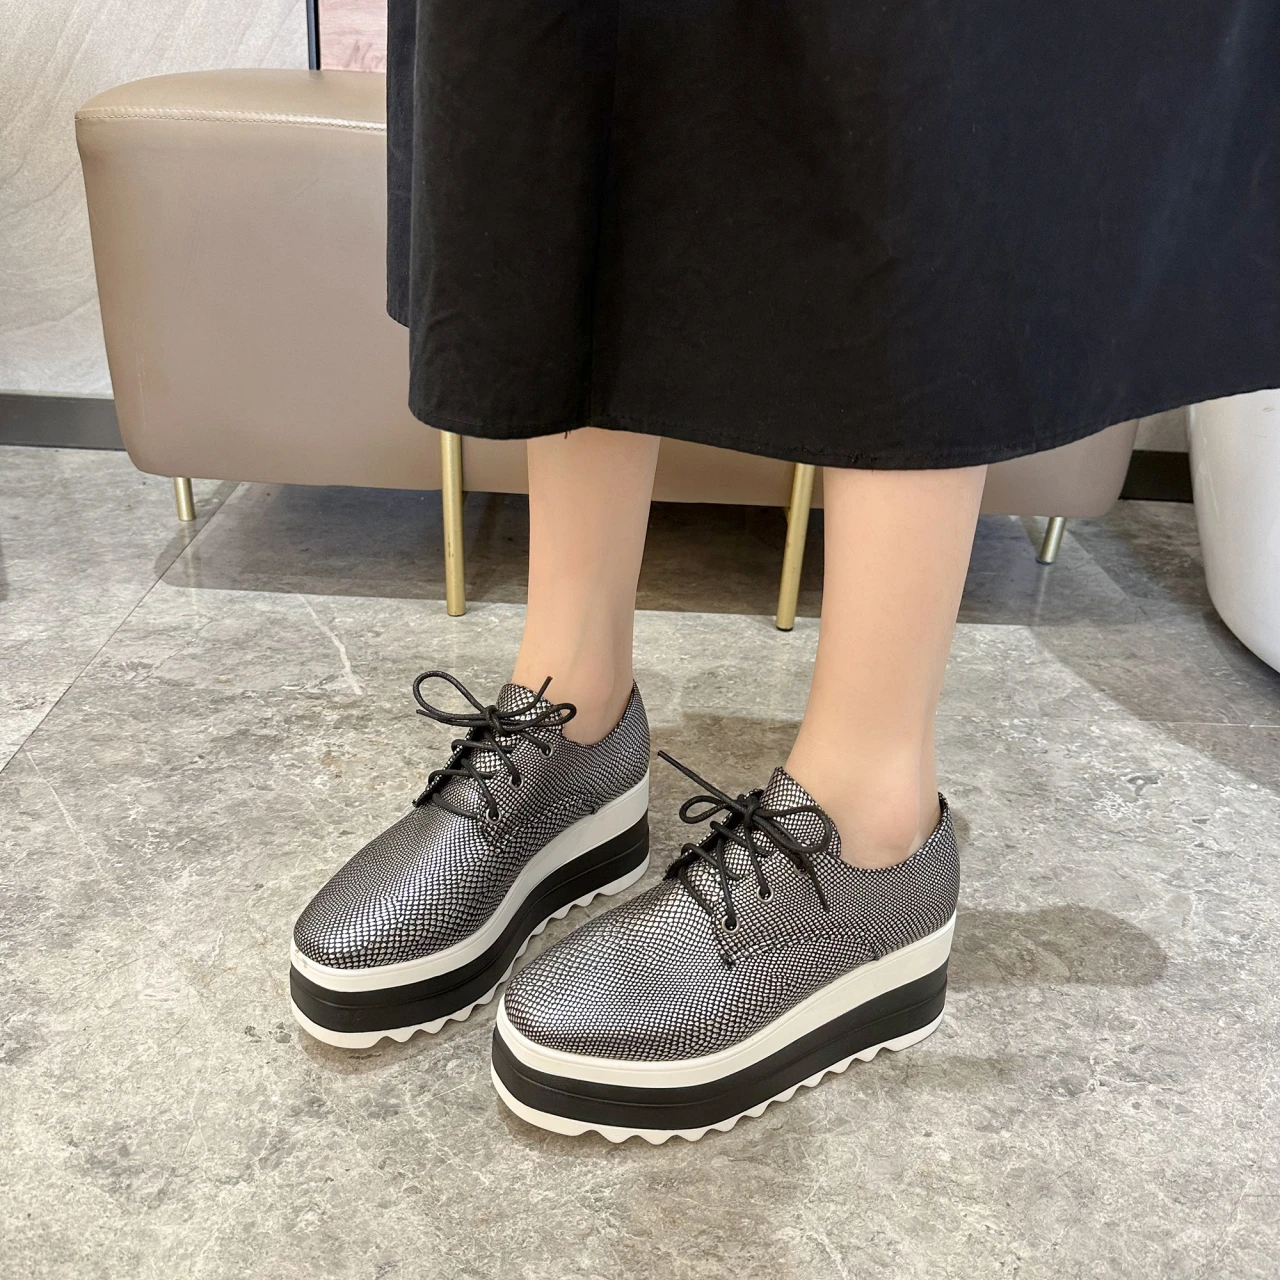 2023 Spring New Women Flat Platform Shoes Slip on Moccains Ladies Casual Shoes Woman Thick Sole Brogue Creepers Sneakers